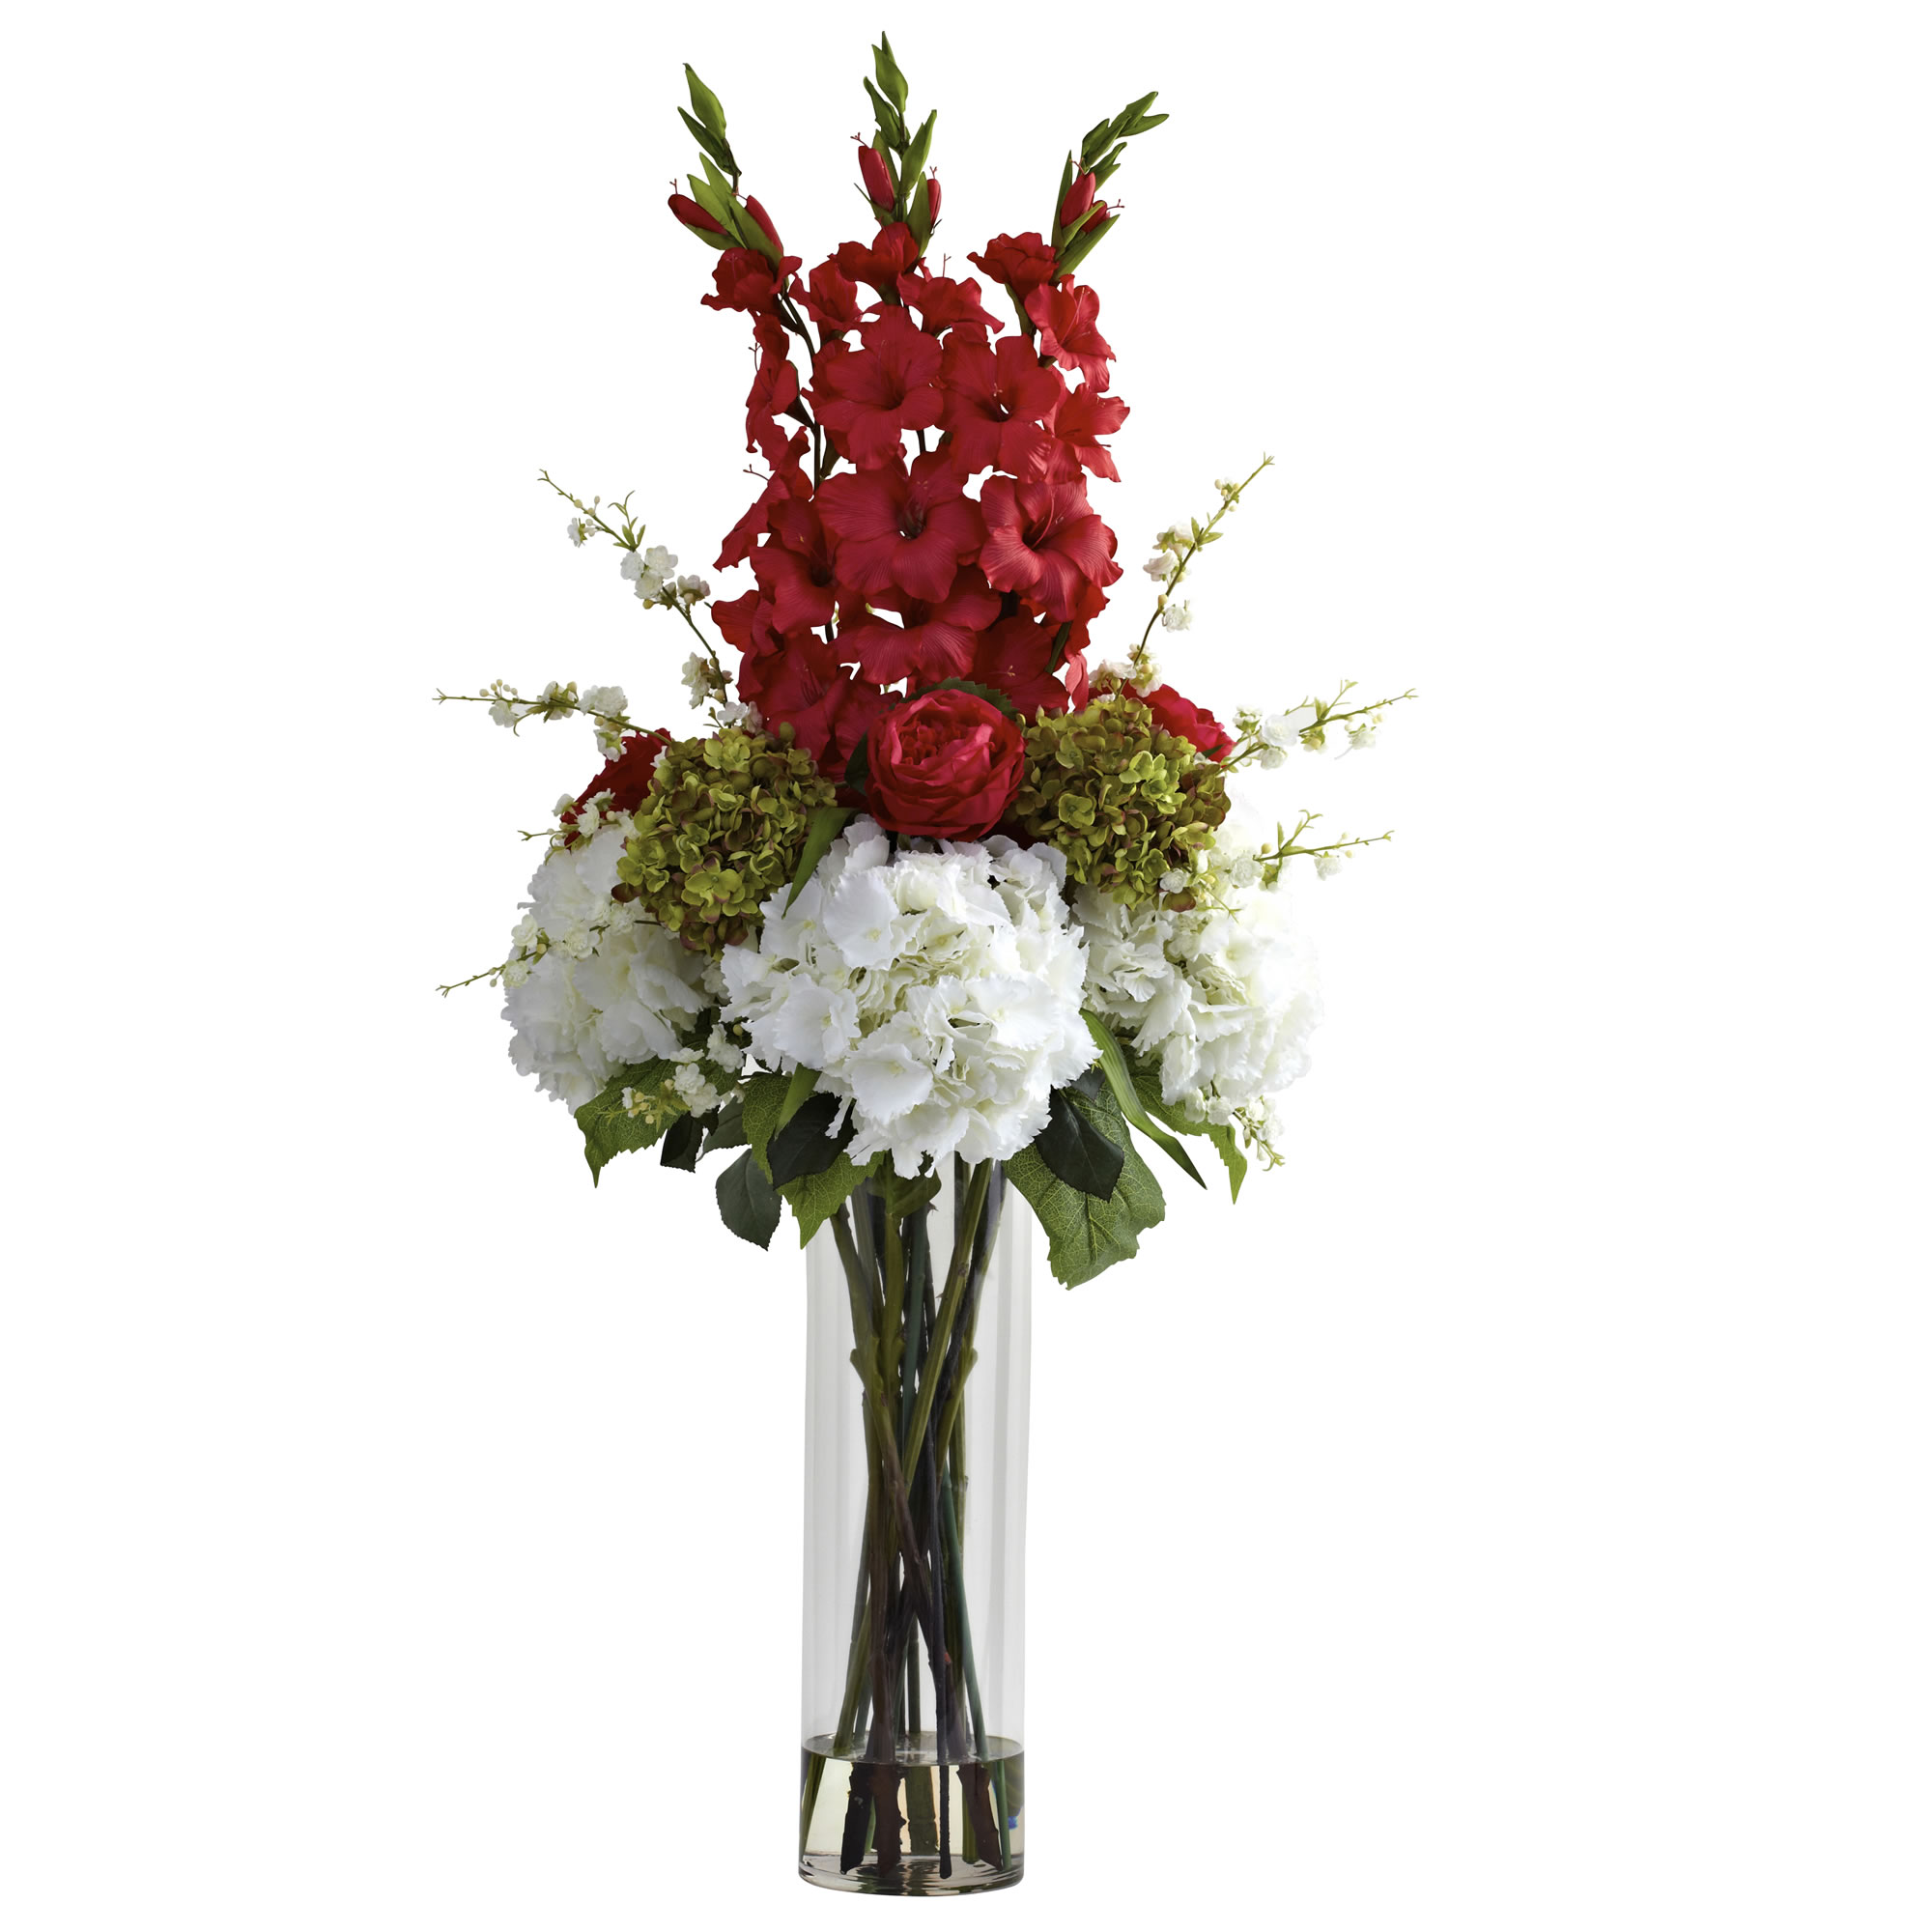 48 Inch Silk Giant Mixed Floral Arrangement In Vase: Multiple Colors